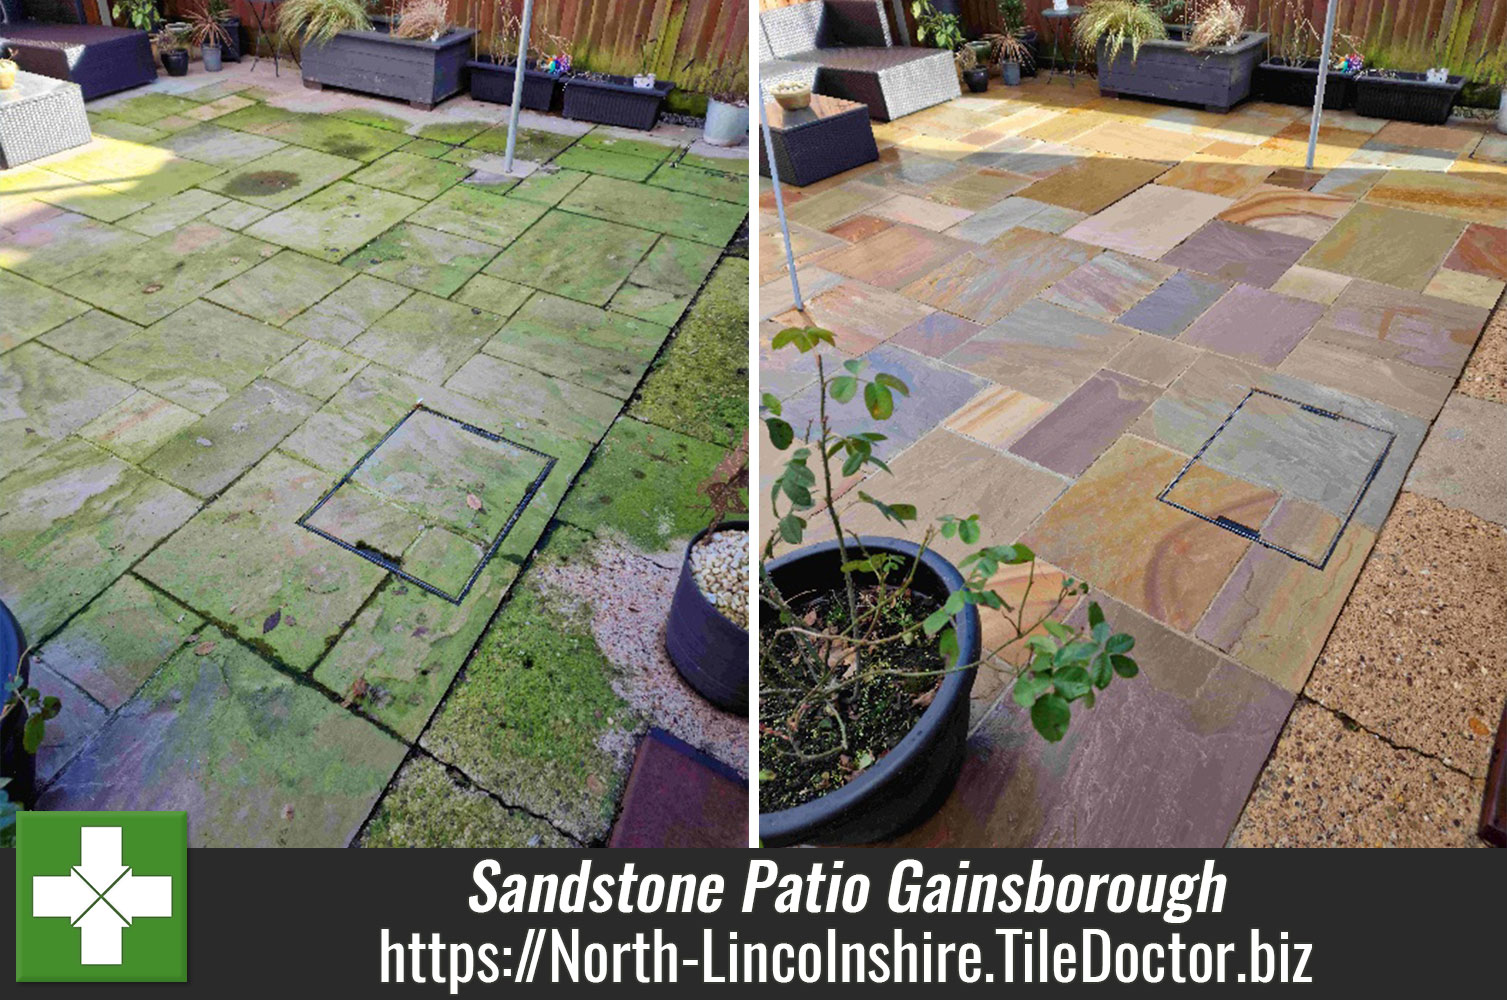 Patio & Driveway Cleaner used on Indian Sandstone to remove Algae in Gainsborough